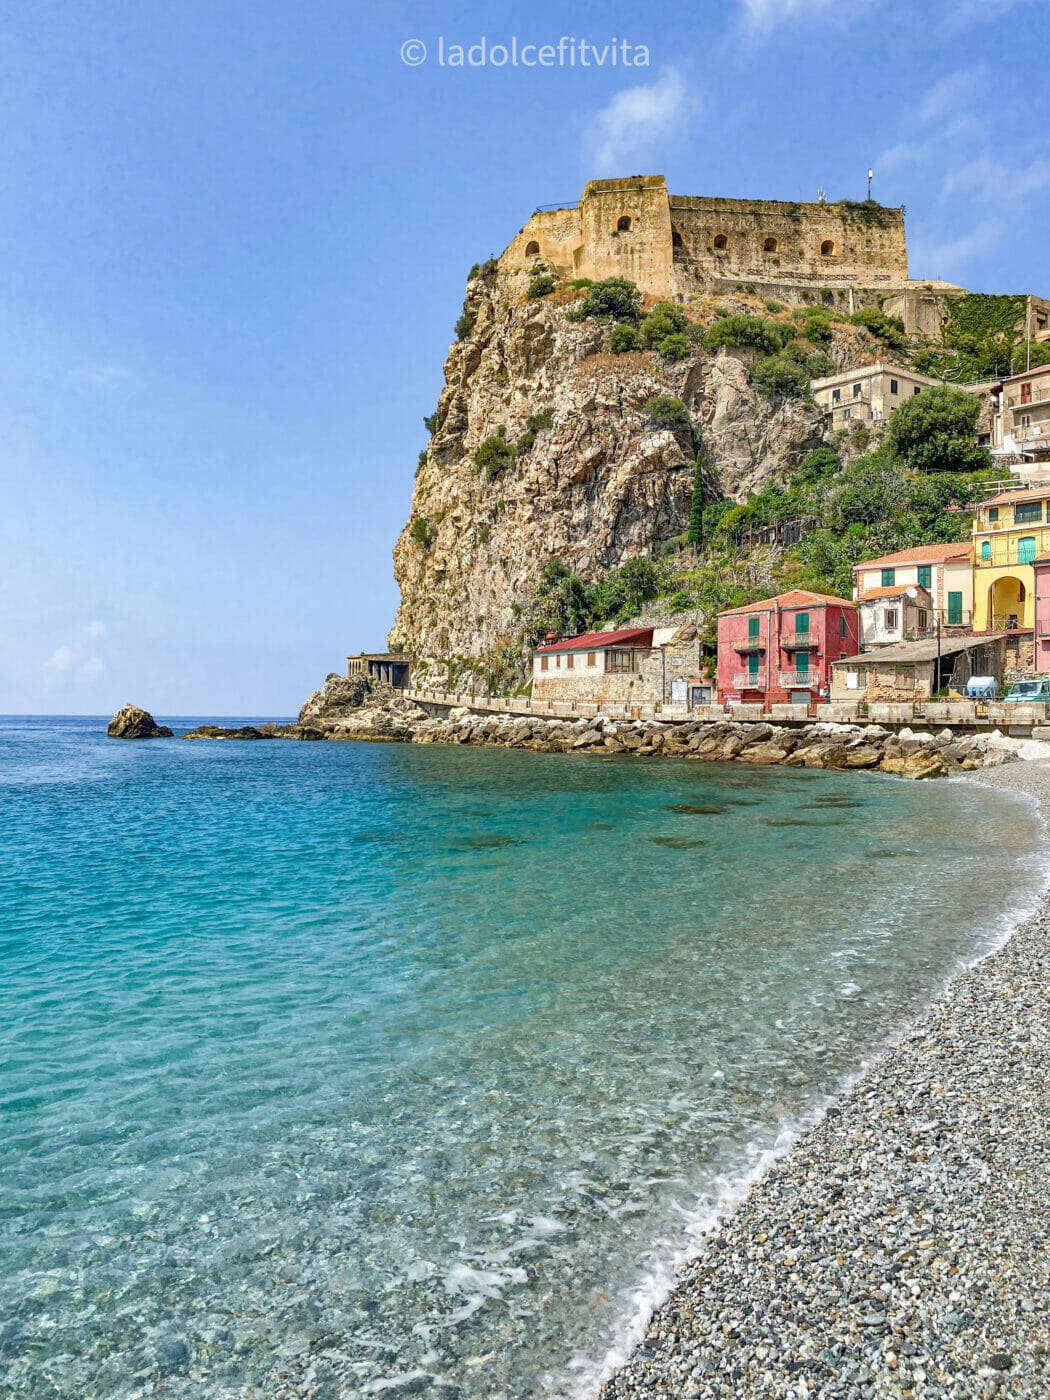 Castello Ruffo on a cliff overlooking turquoise sea waters and pebbly beach in Scilla - Calabria, Italy